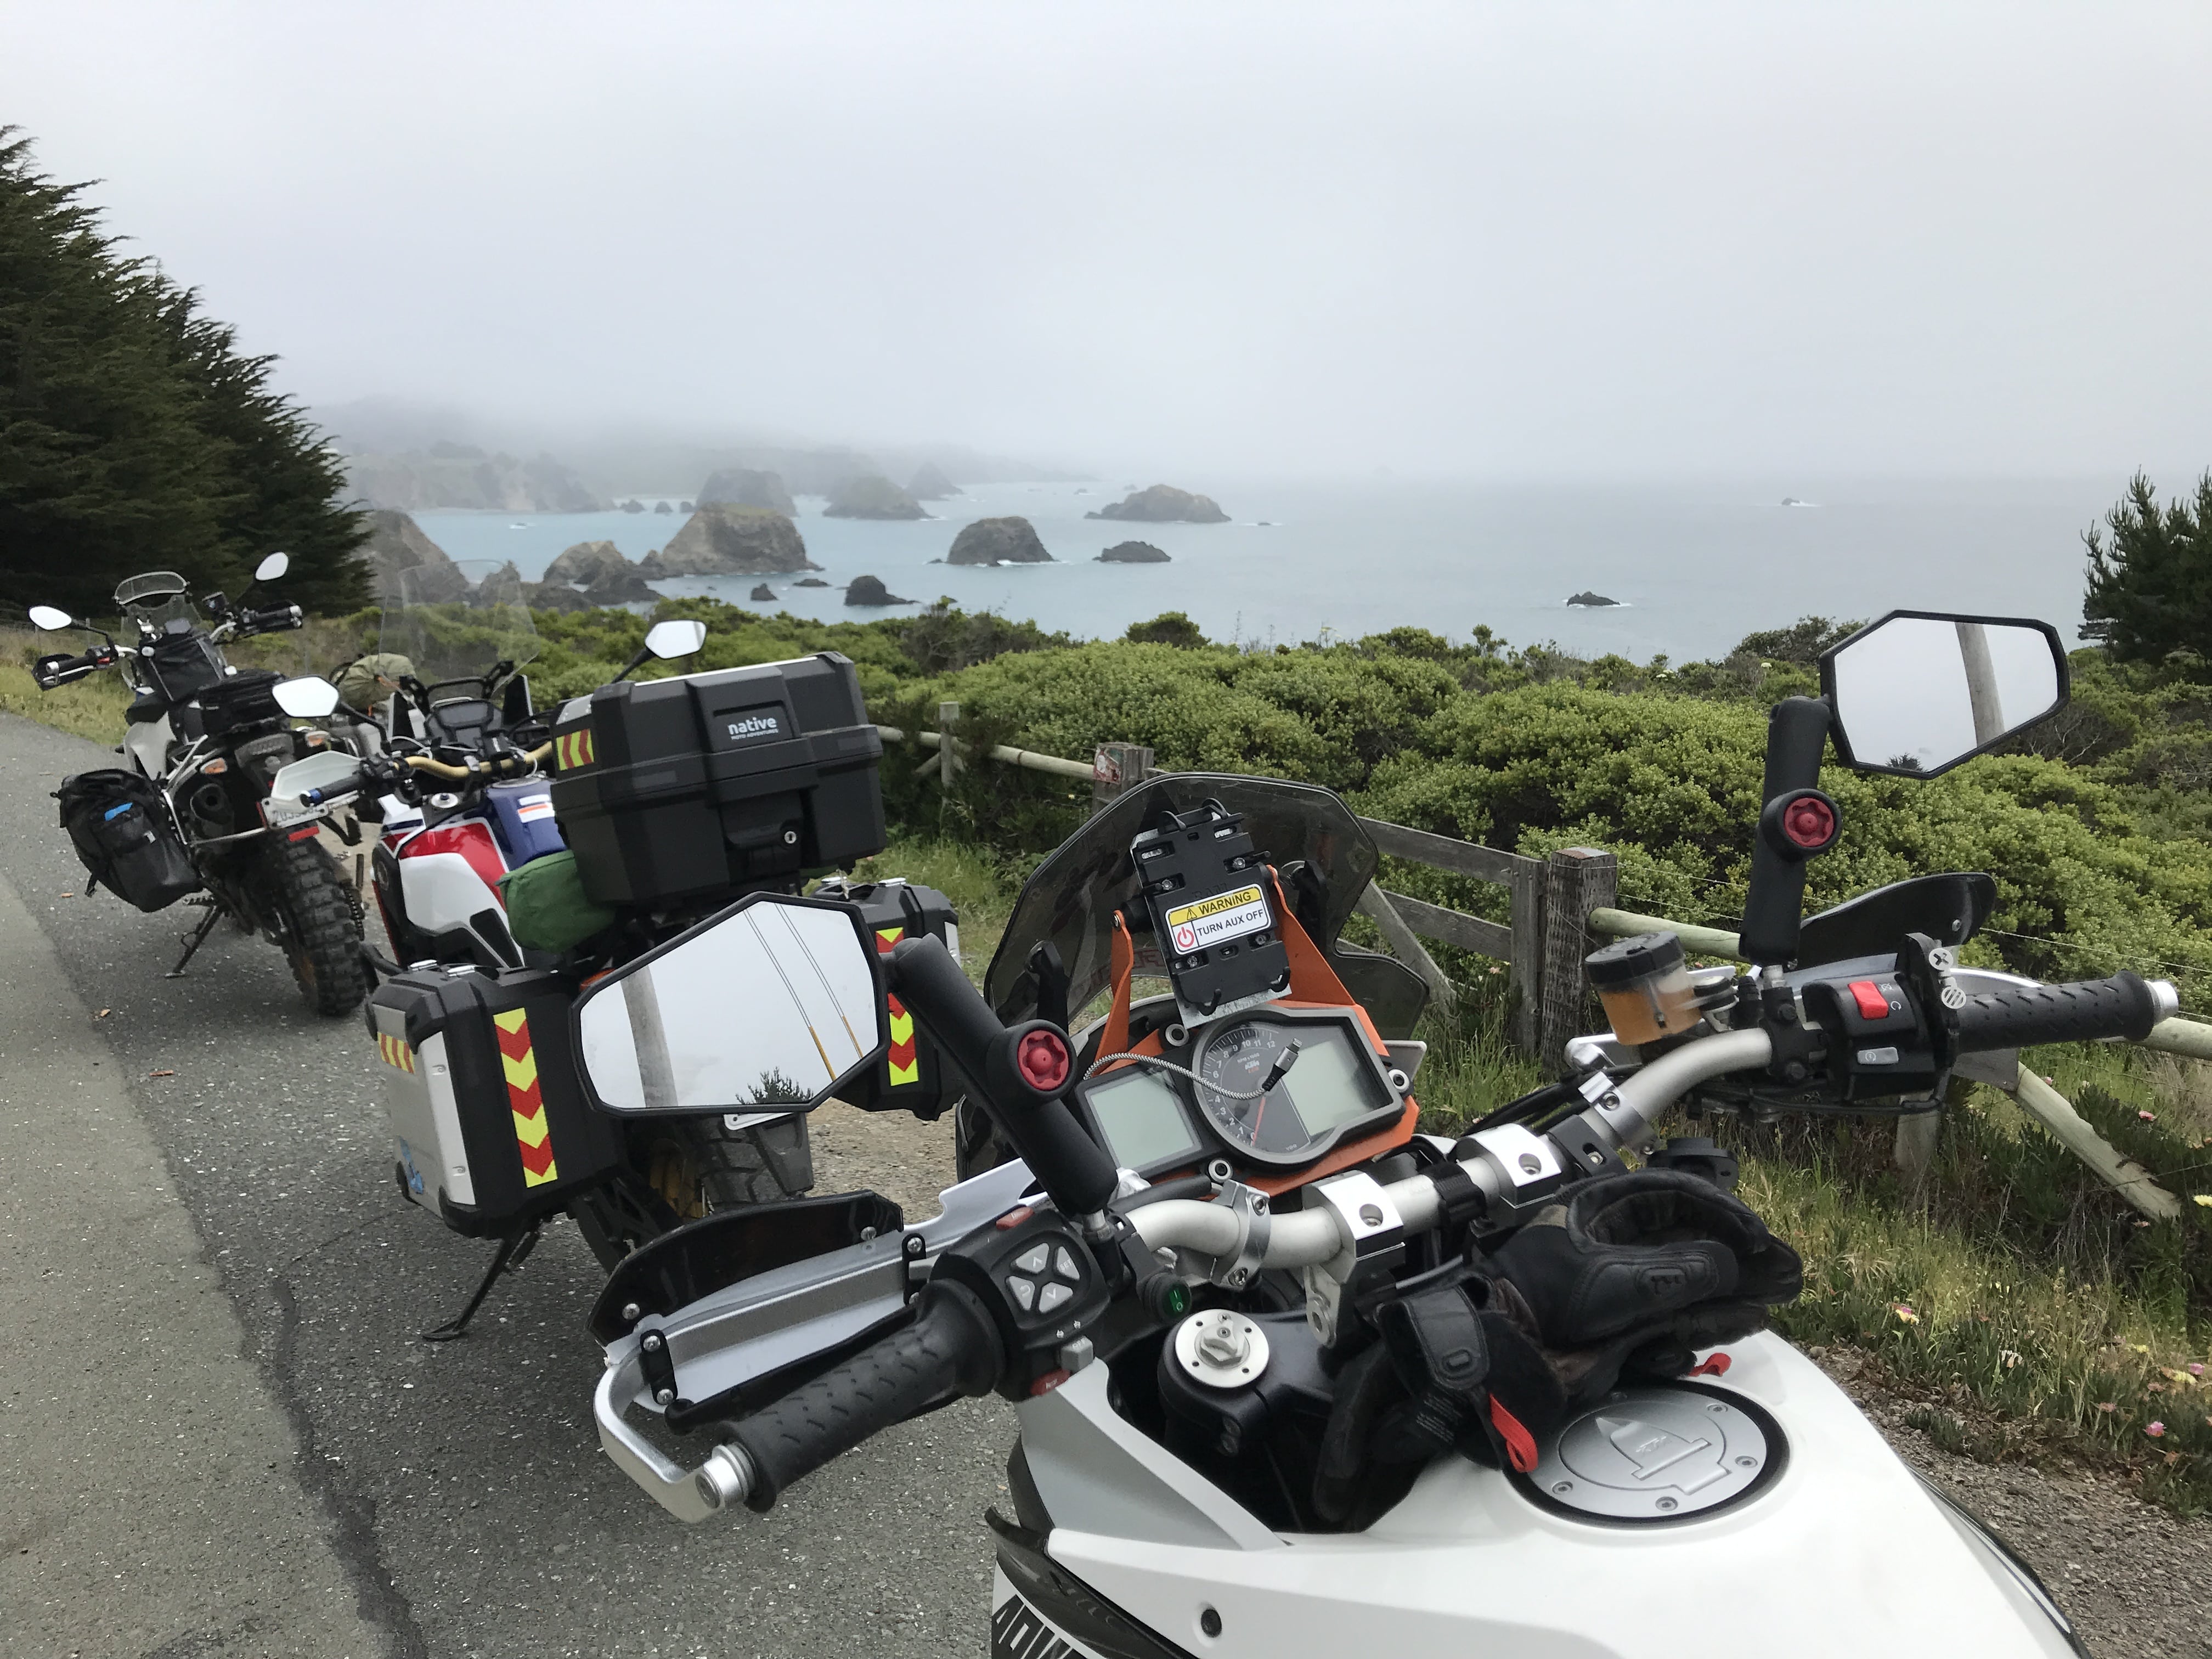 2-Day 'Highway 1 & Carmel' Experience